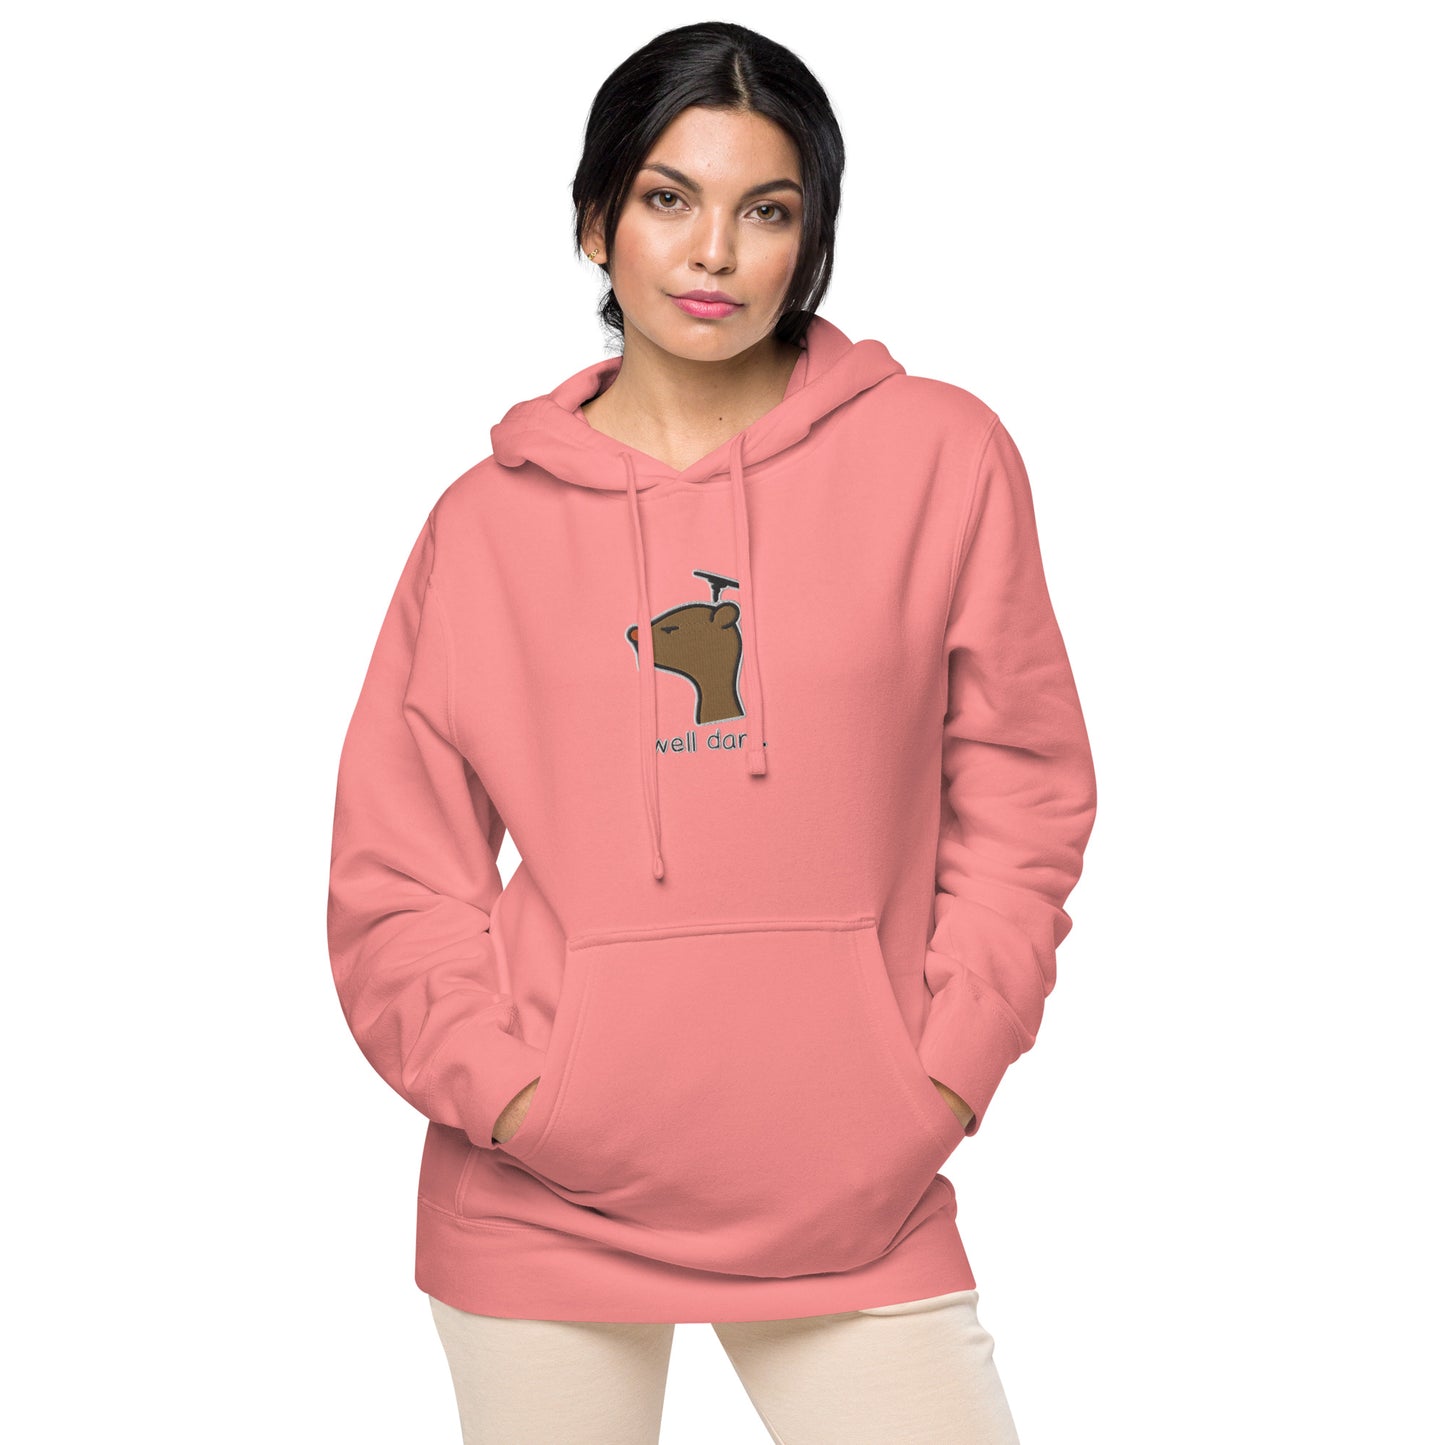 ‘Well Dam” Unisex pigment-dyed hoodie